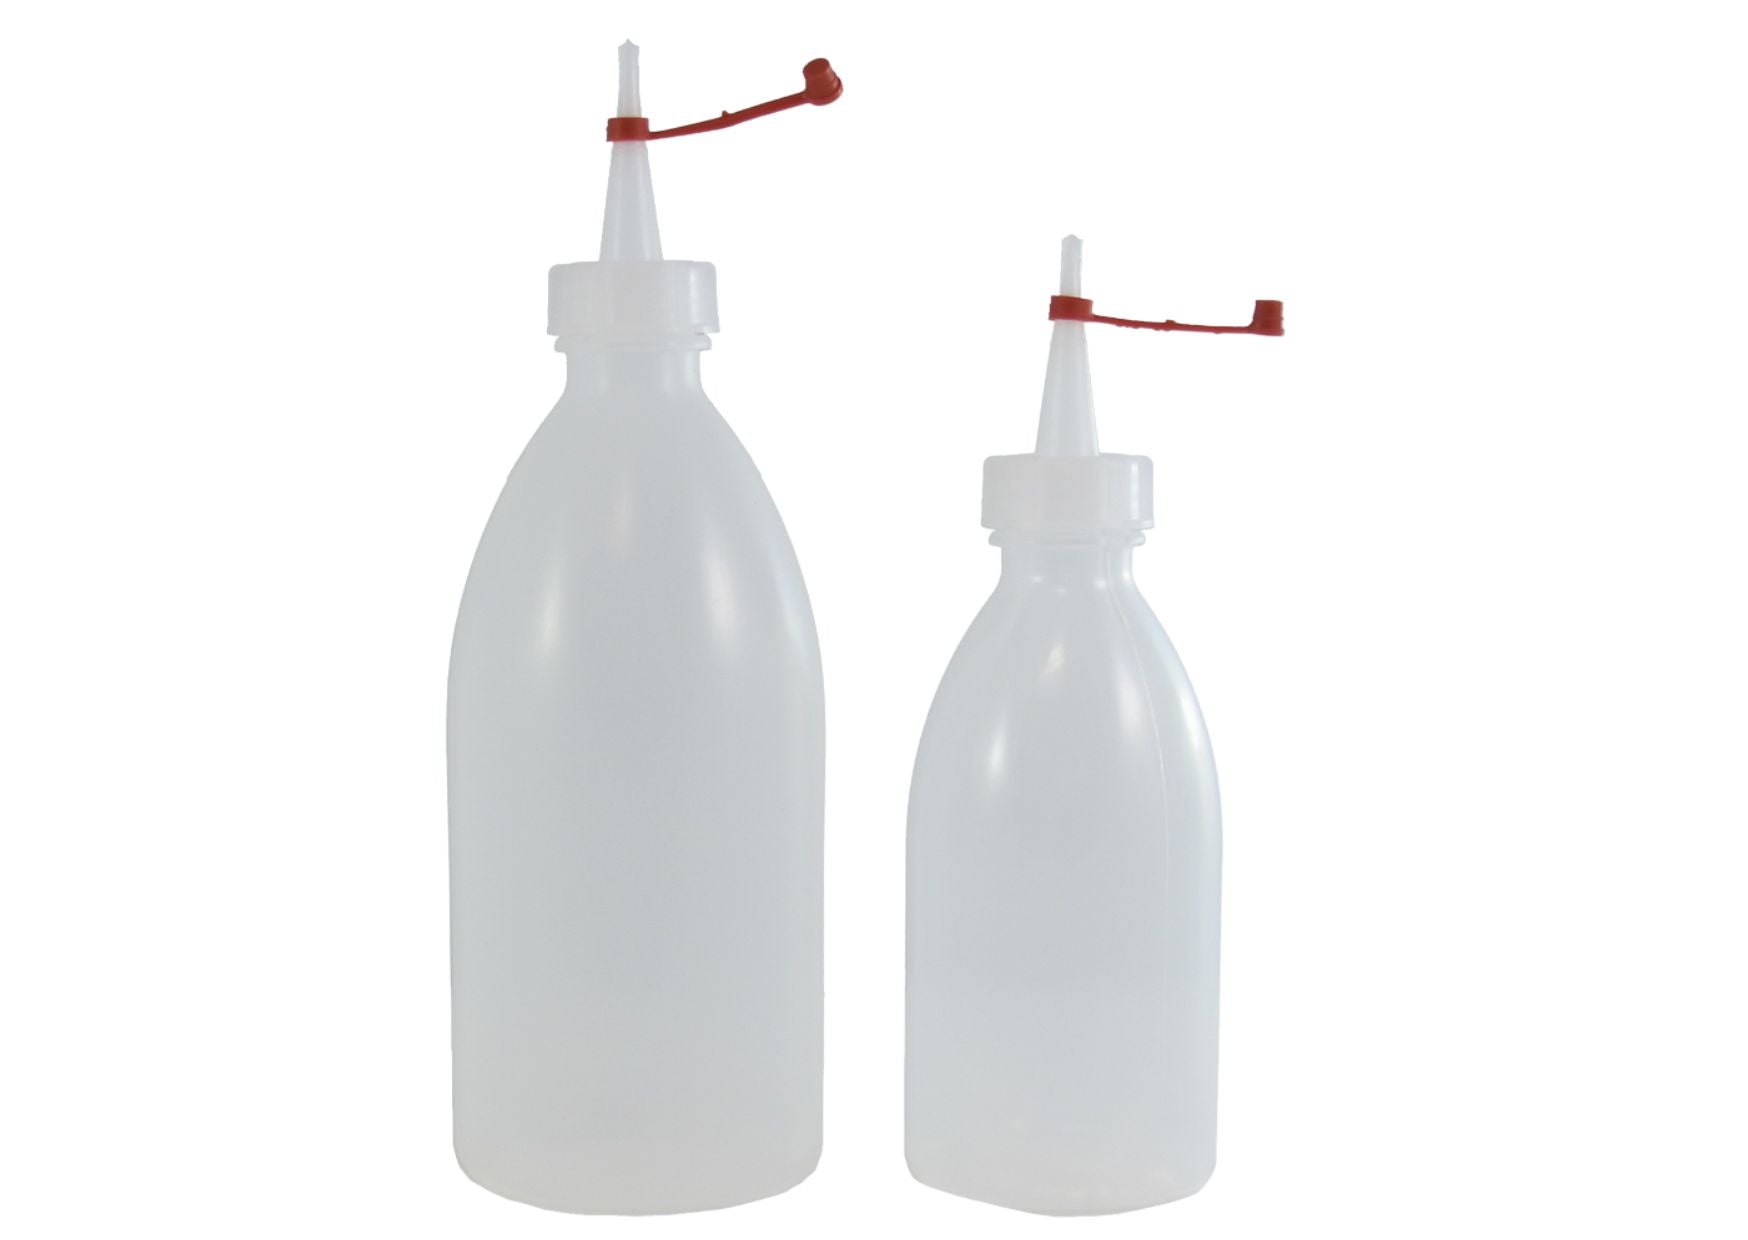 Empty bottle with funnel attachment, 500 ml bottle